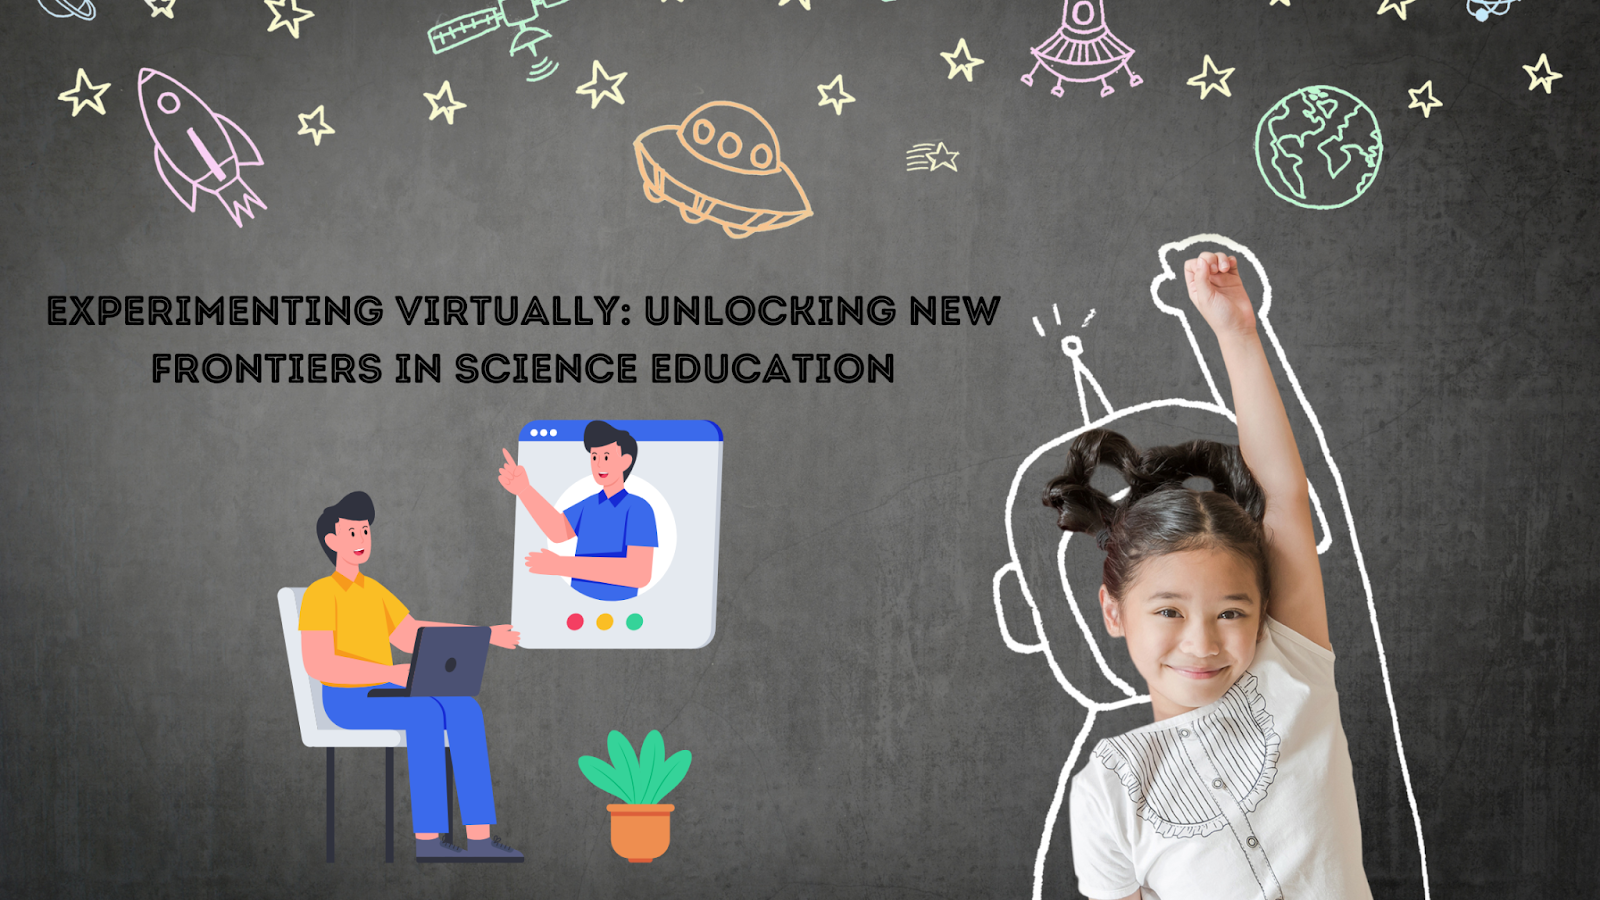 Experimenting Virtually: Unlocking New Frontiers in Science Education